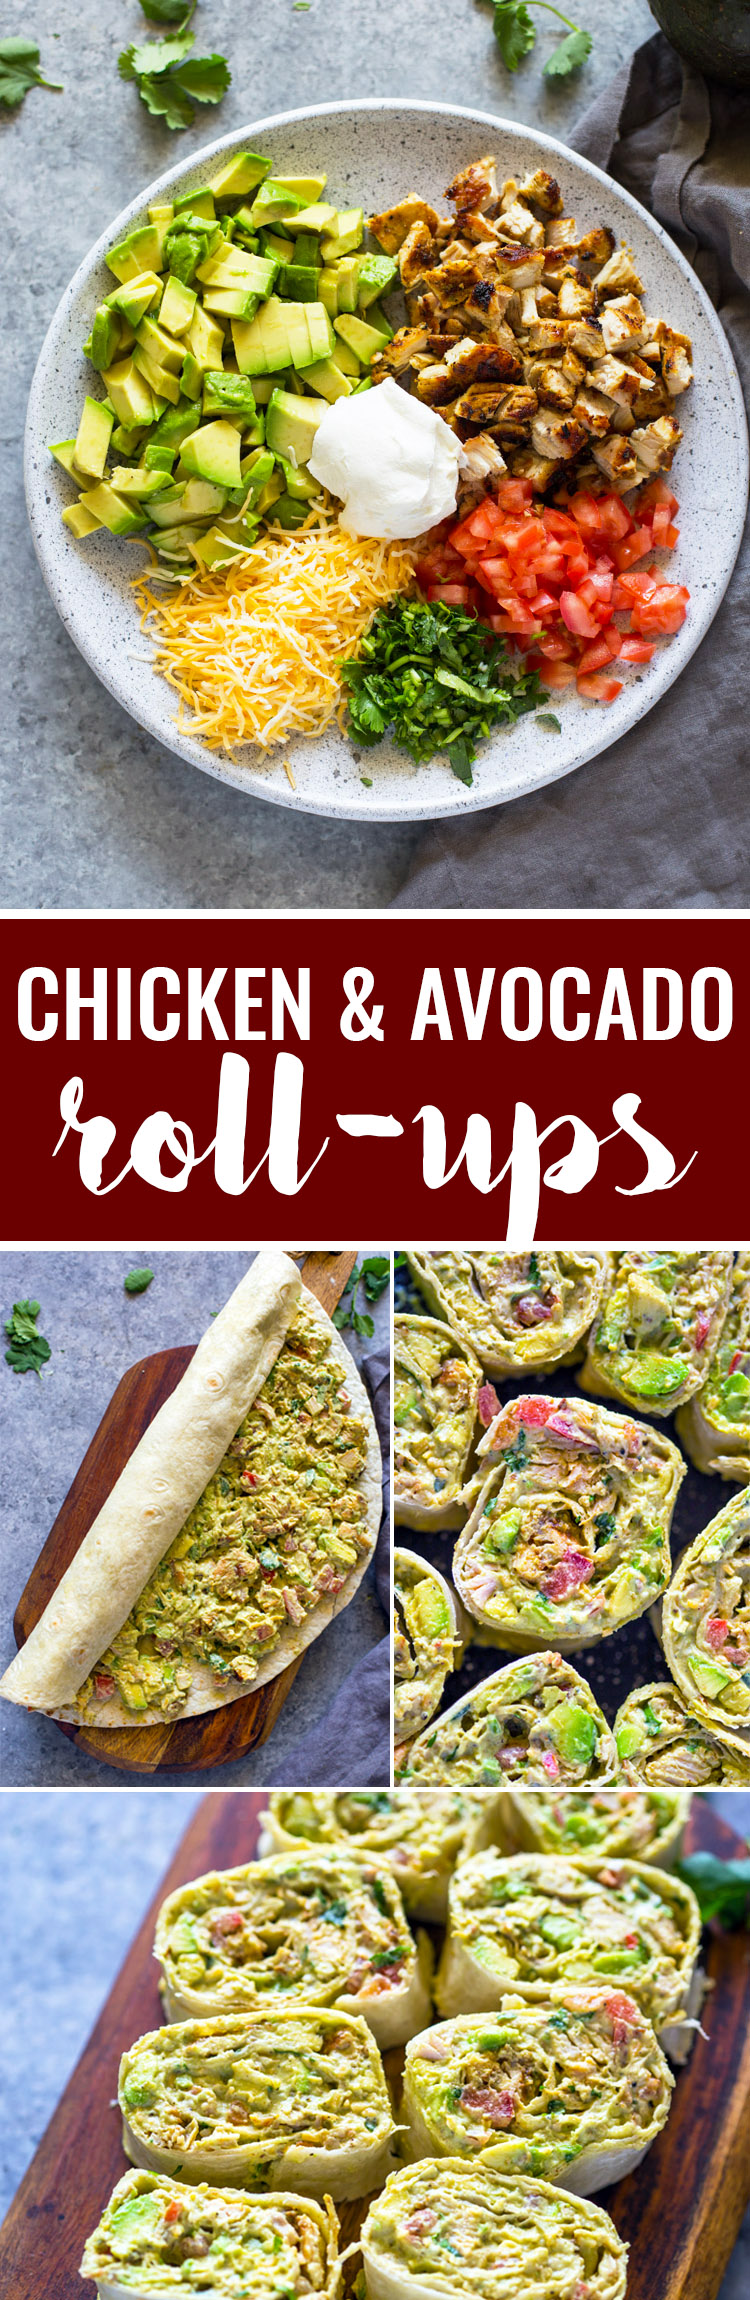 Quick 10 Minute Chicken and Avocado Roll-ups